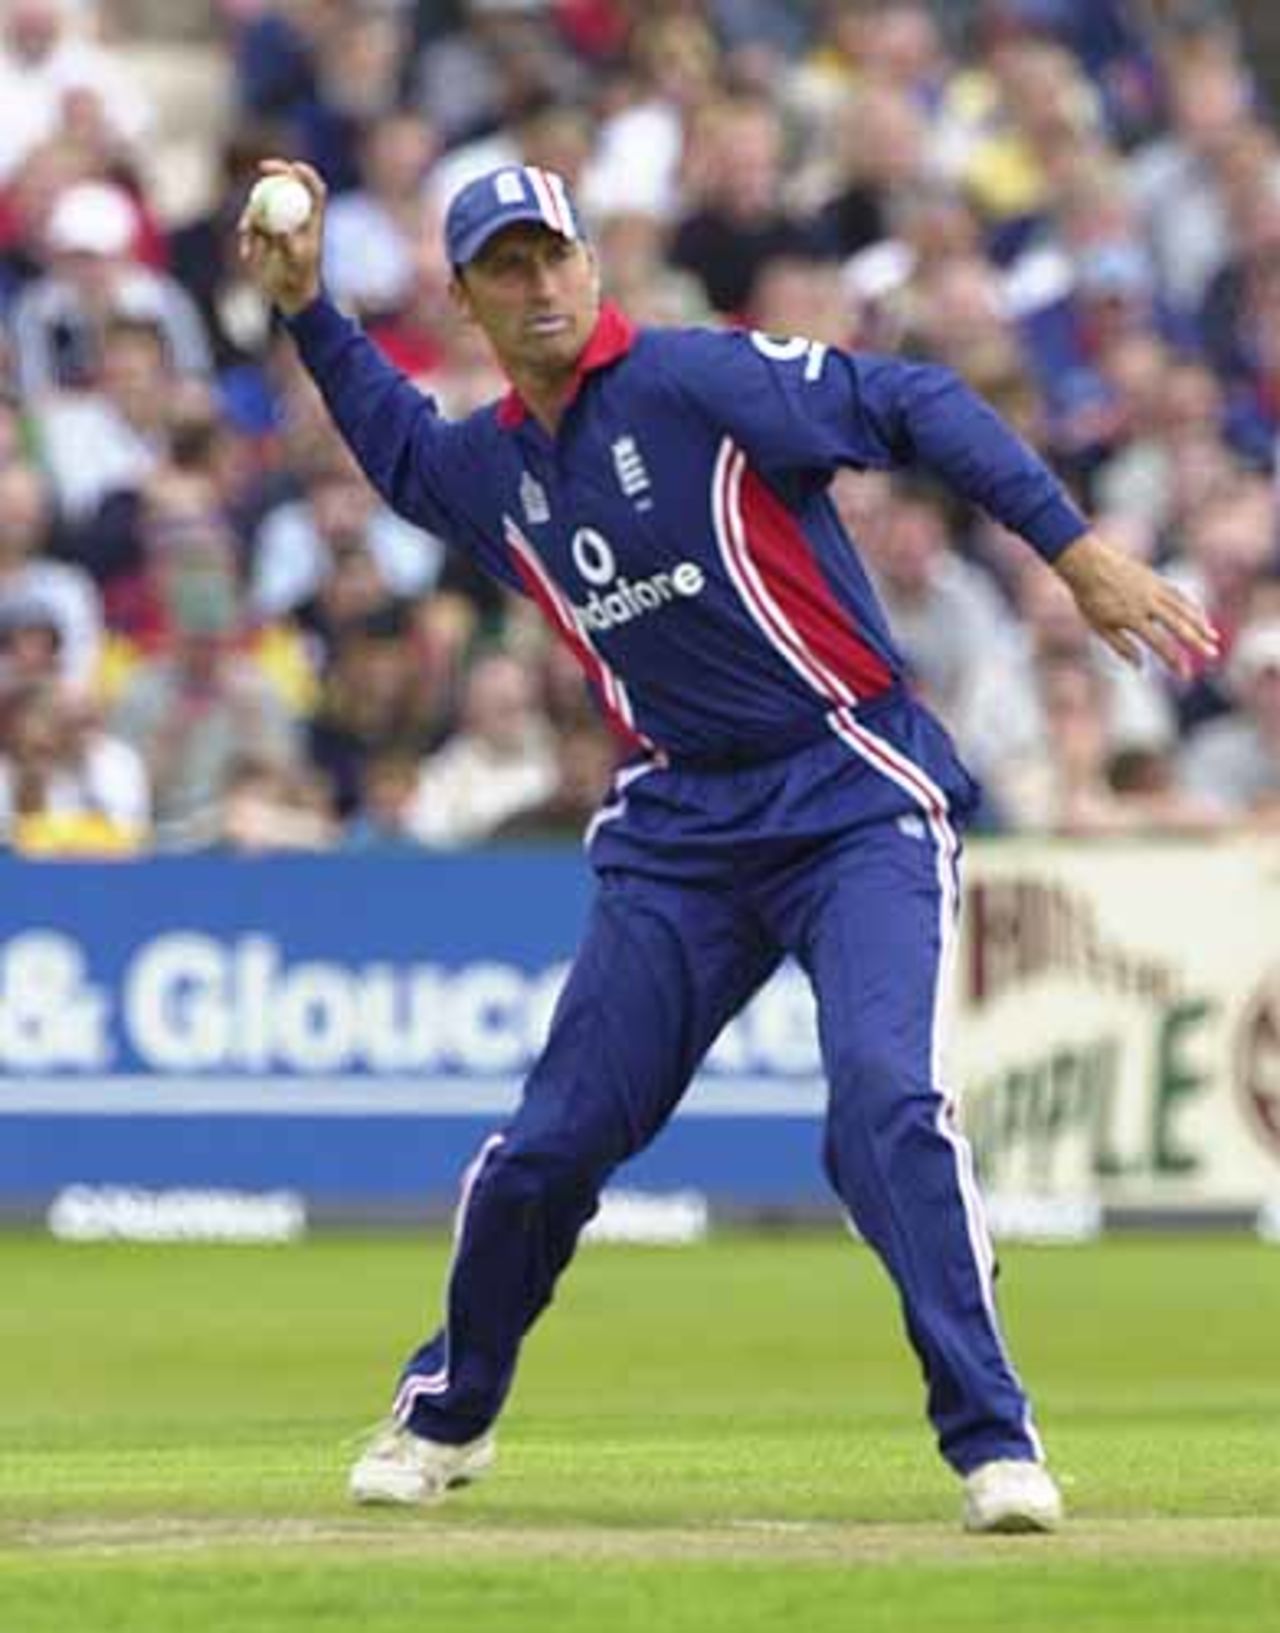 Nasser Hussain in action in the field, England v Sri Lanka at Manchester, July 2002